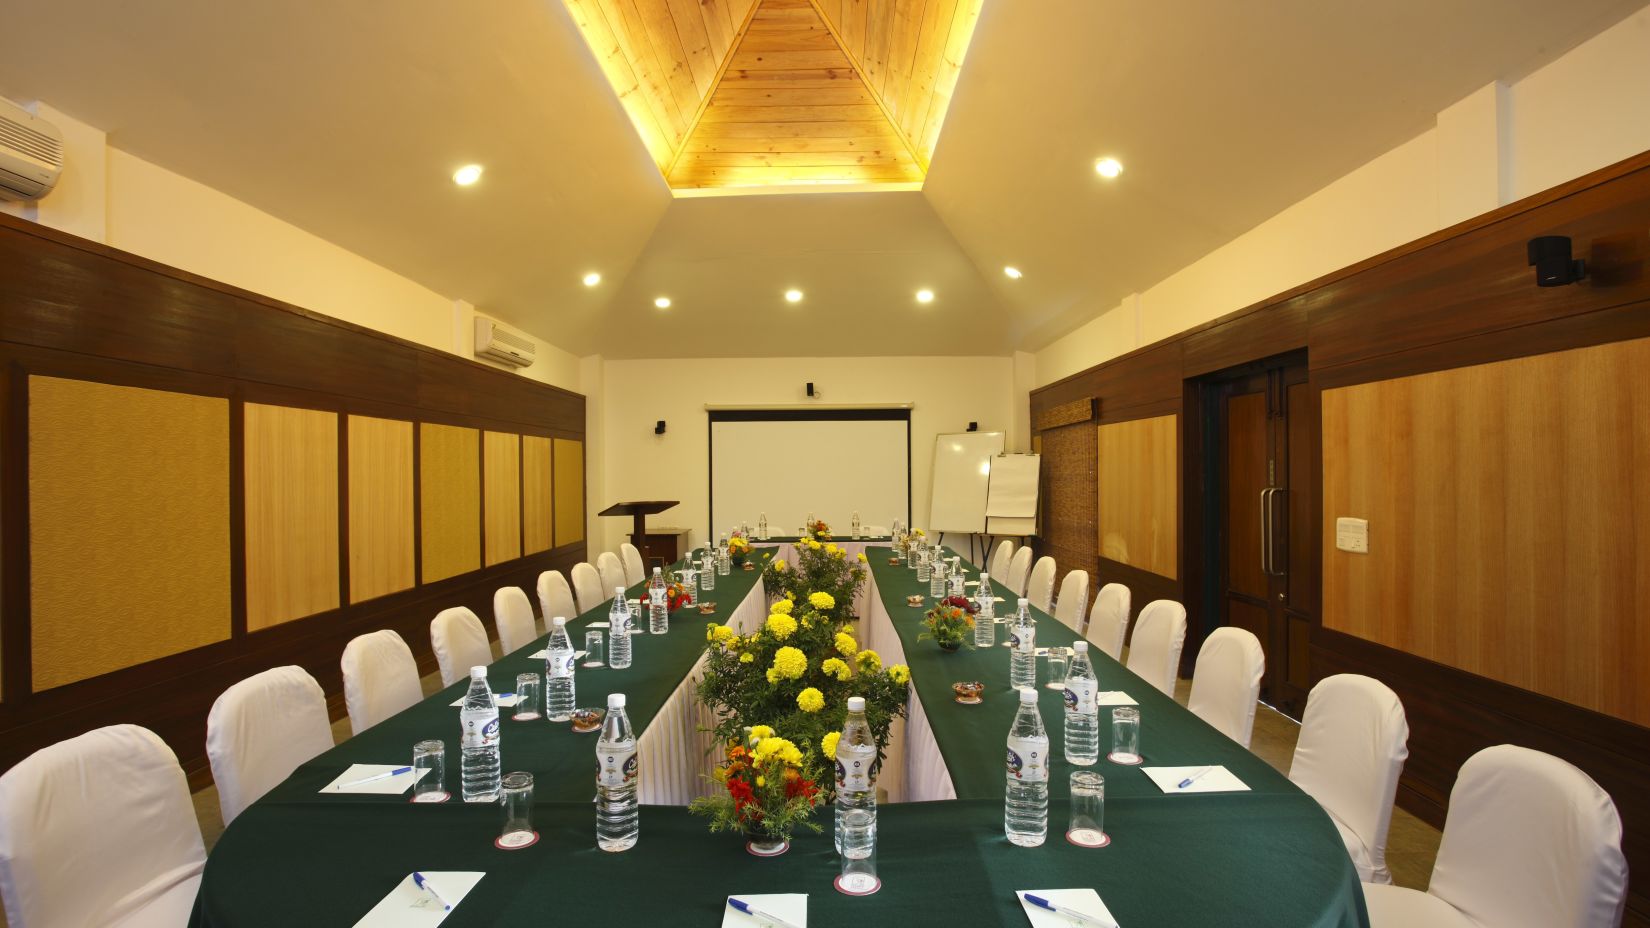 23. Conference Hall